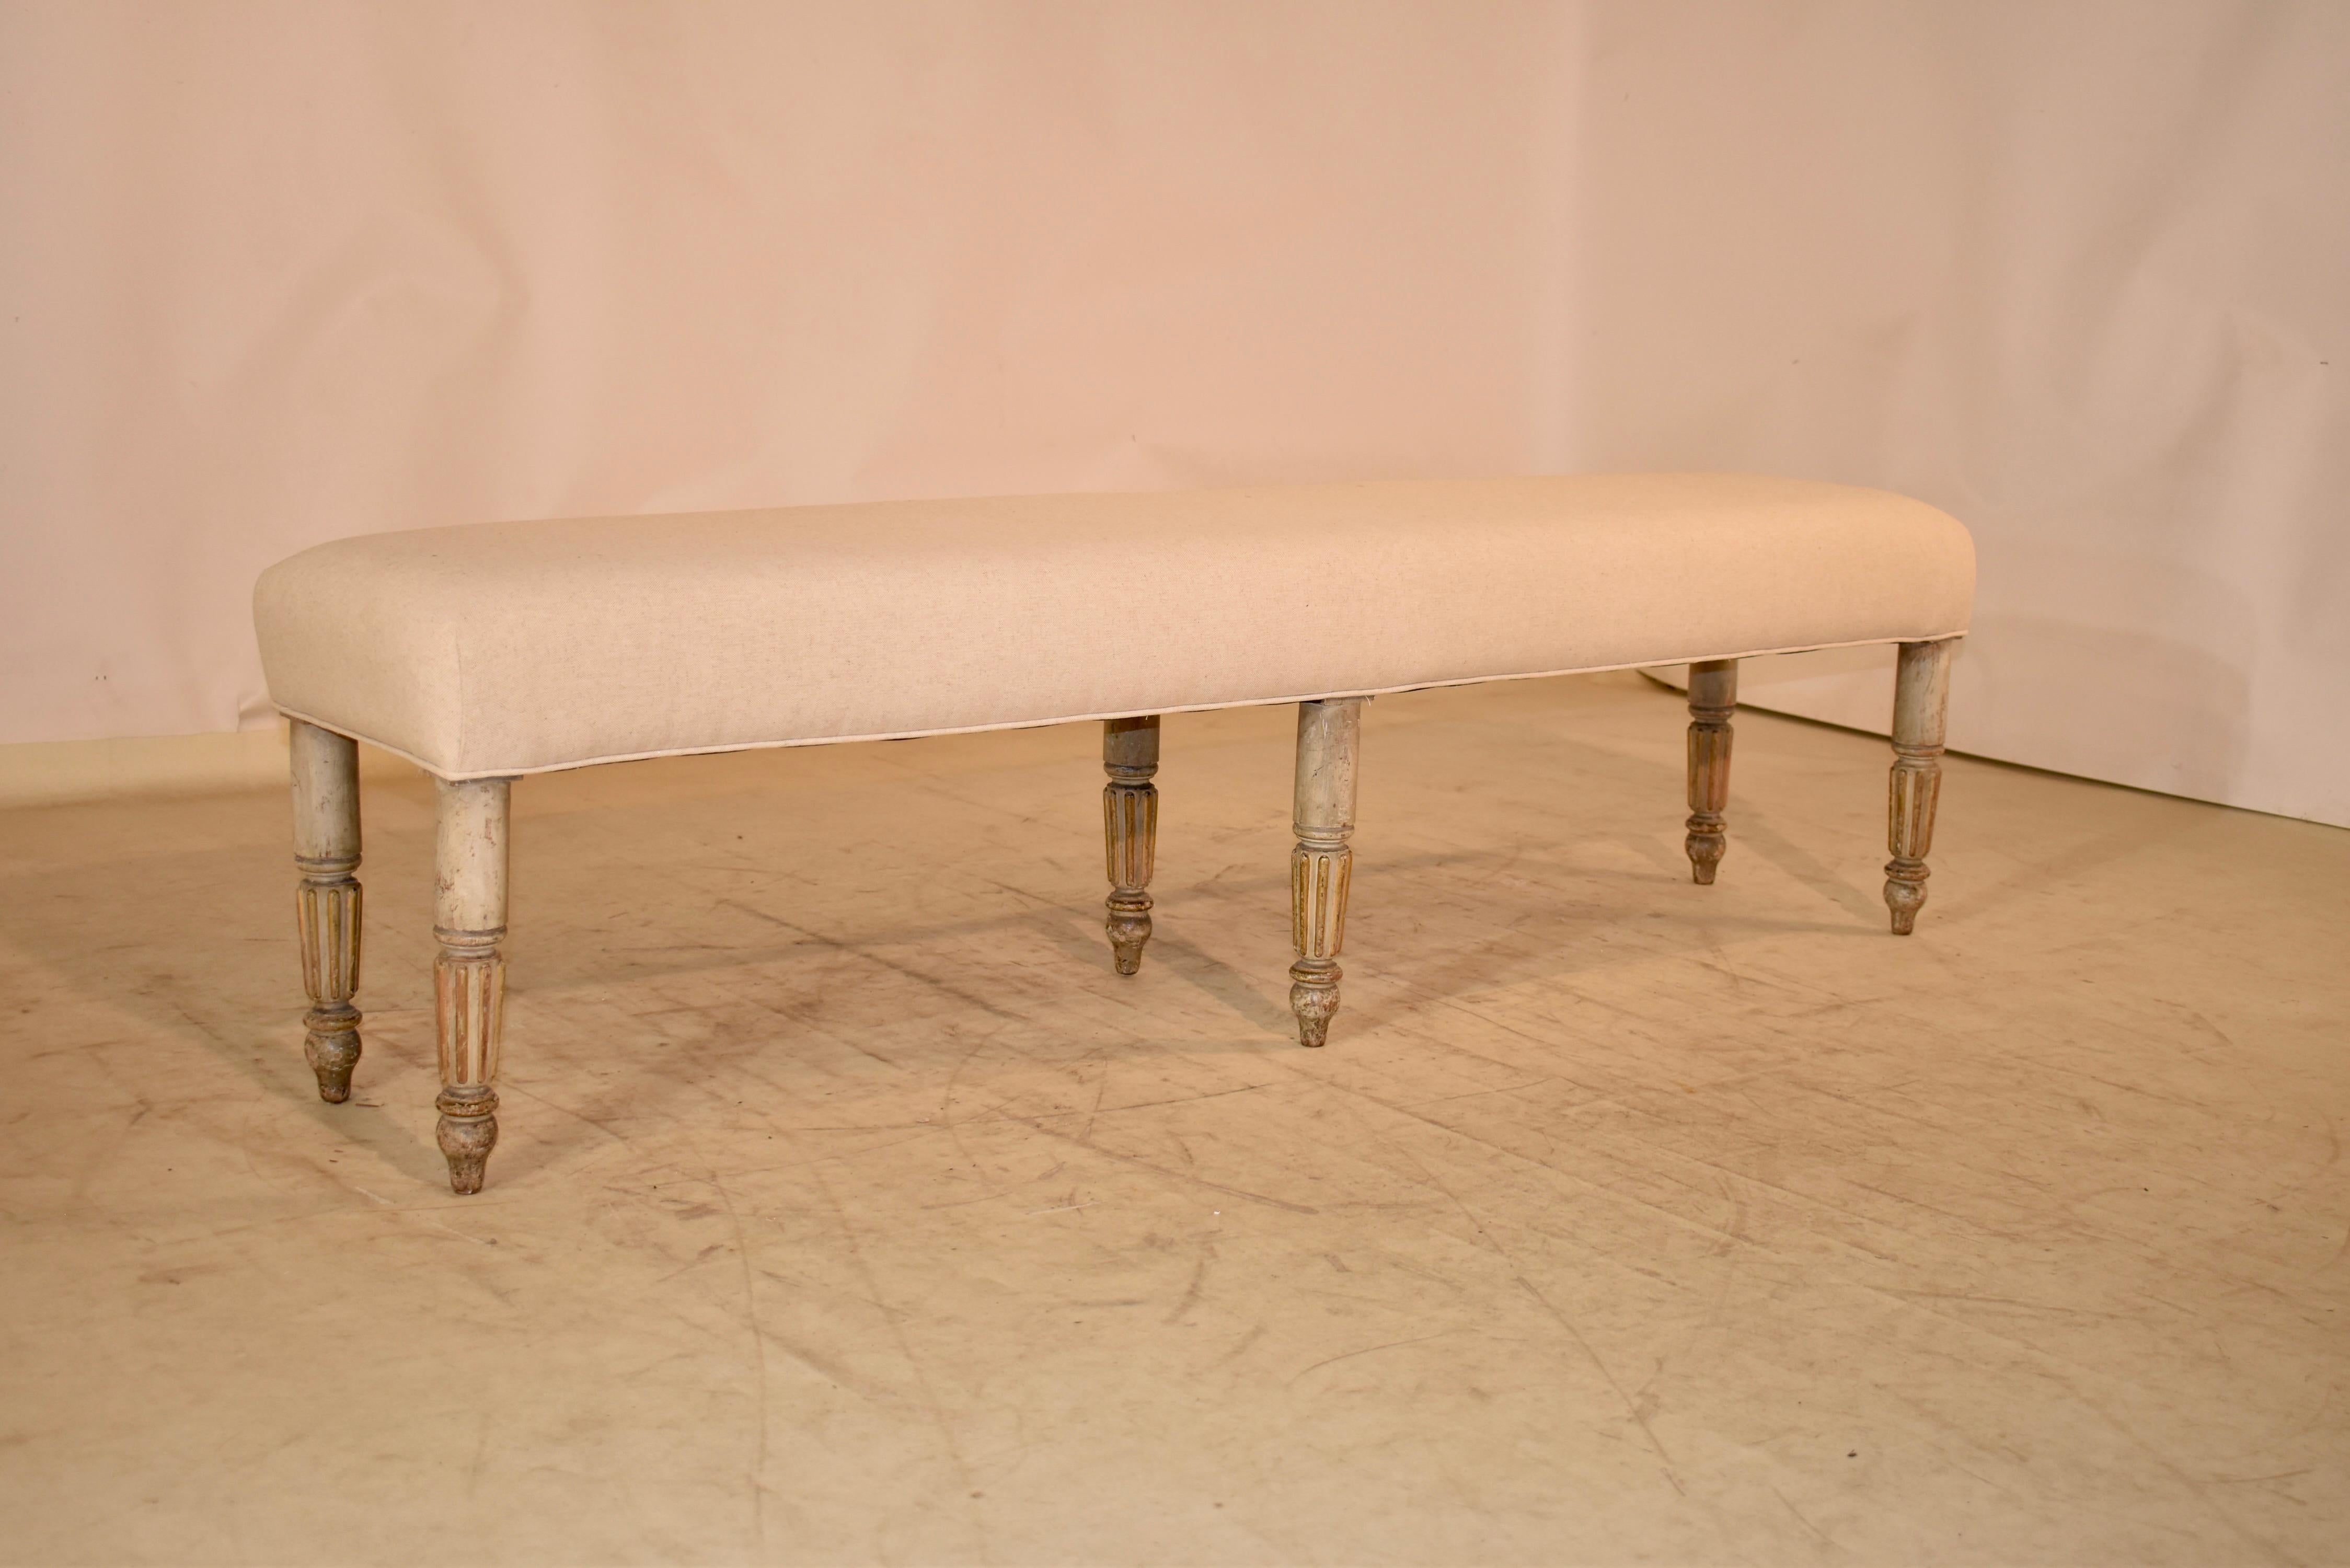 Earl 19th century Louis Philippe I bench made from fruitwood and with the original paint finish.  The bench is supported on six hand turned and reeded legs, ending in tall hand turned feet.  The seat of the bench has been newly upholstered in linen